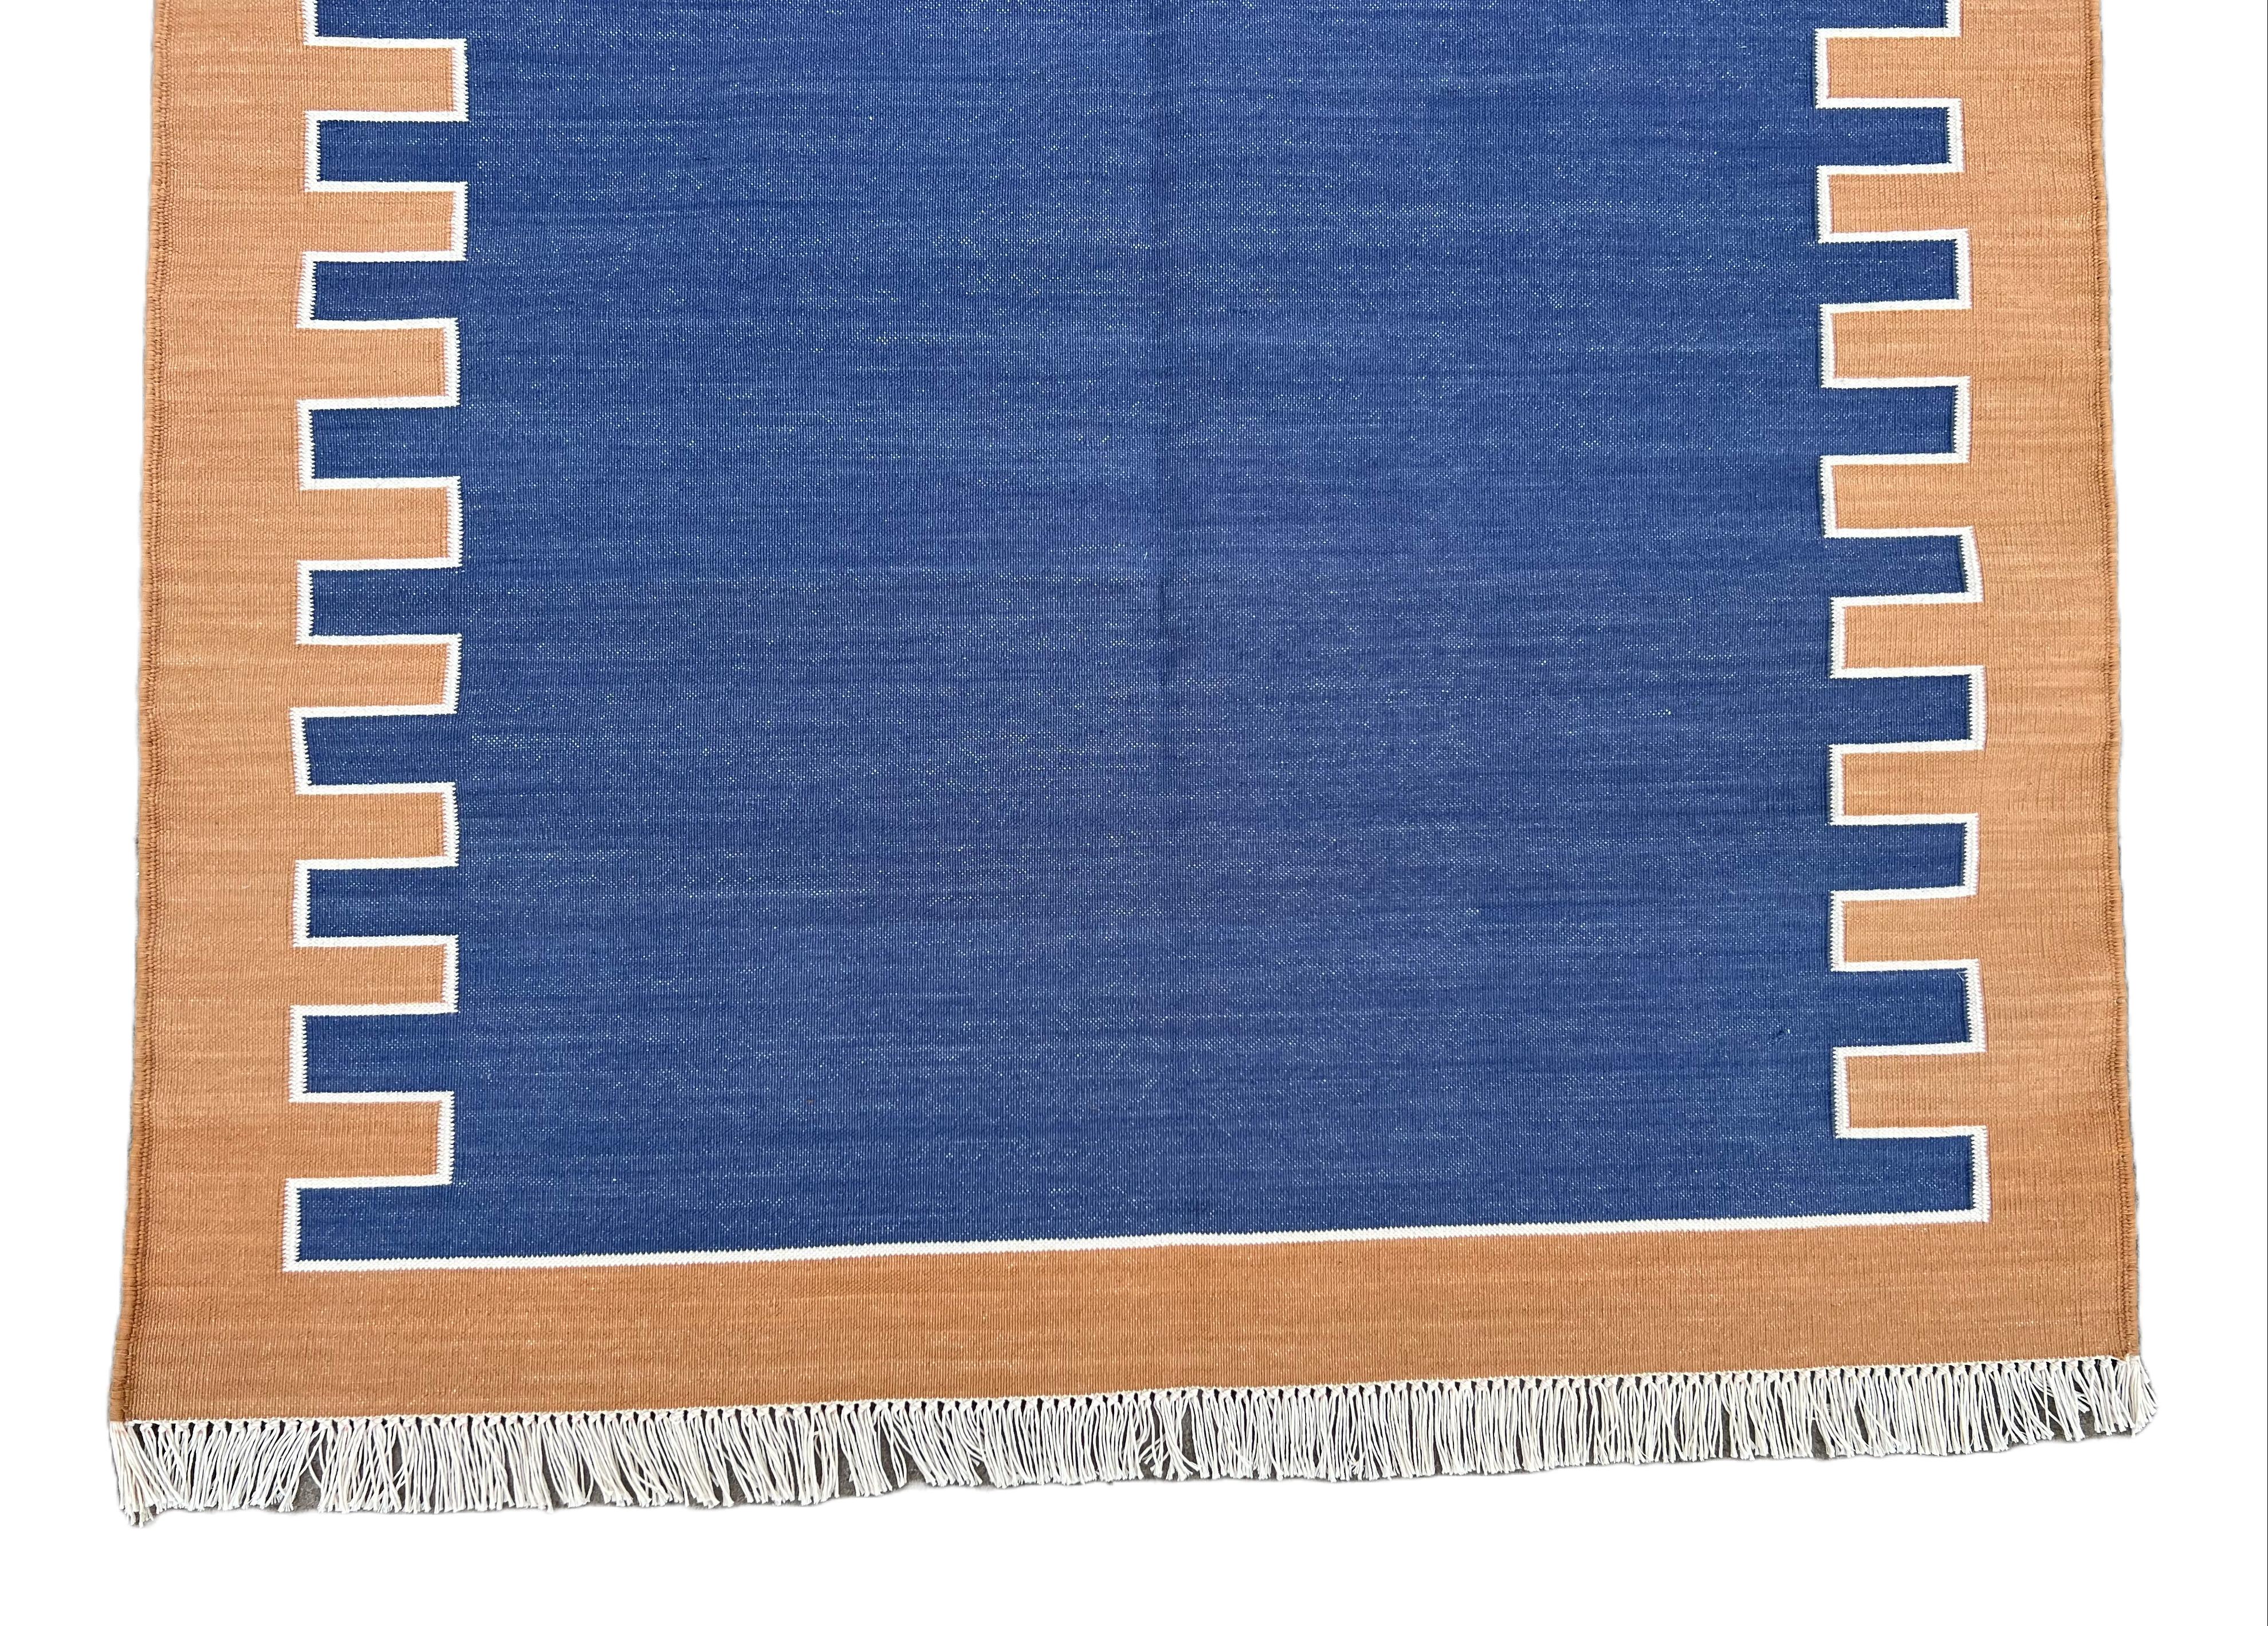 Hand-Woven Handmade Cotton Area Flat Weave Rug, 3x5 Blue And Tan Zig Zag Striped Dhurrie For Sale